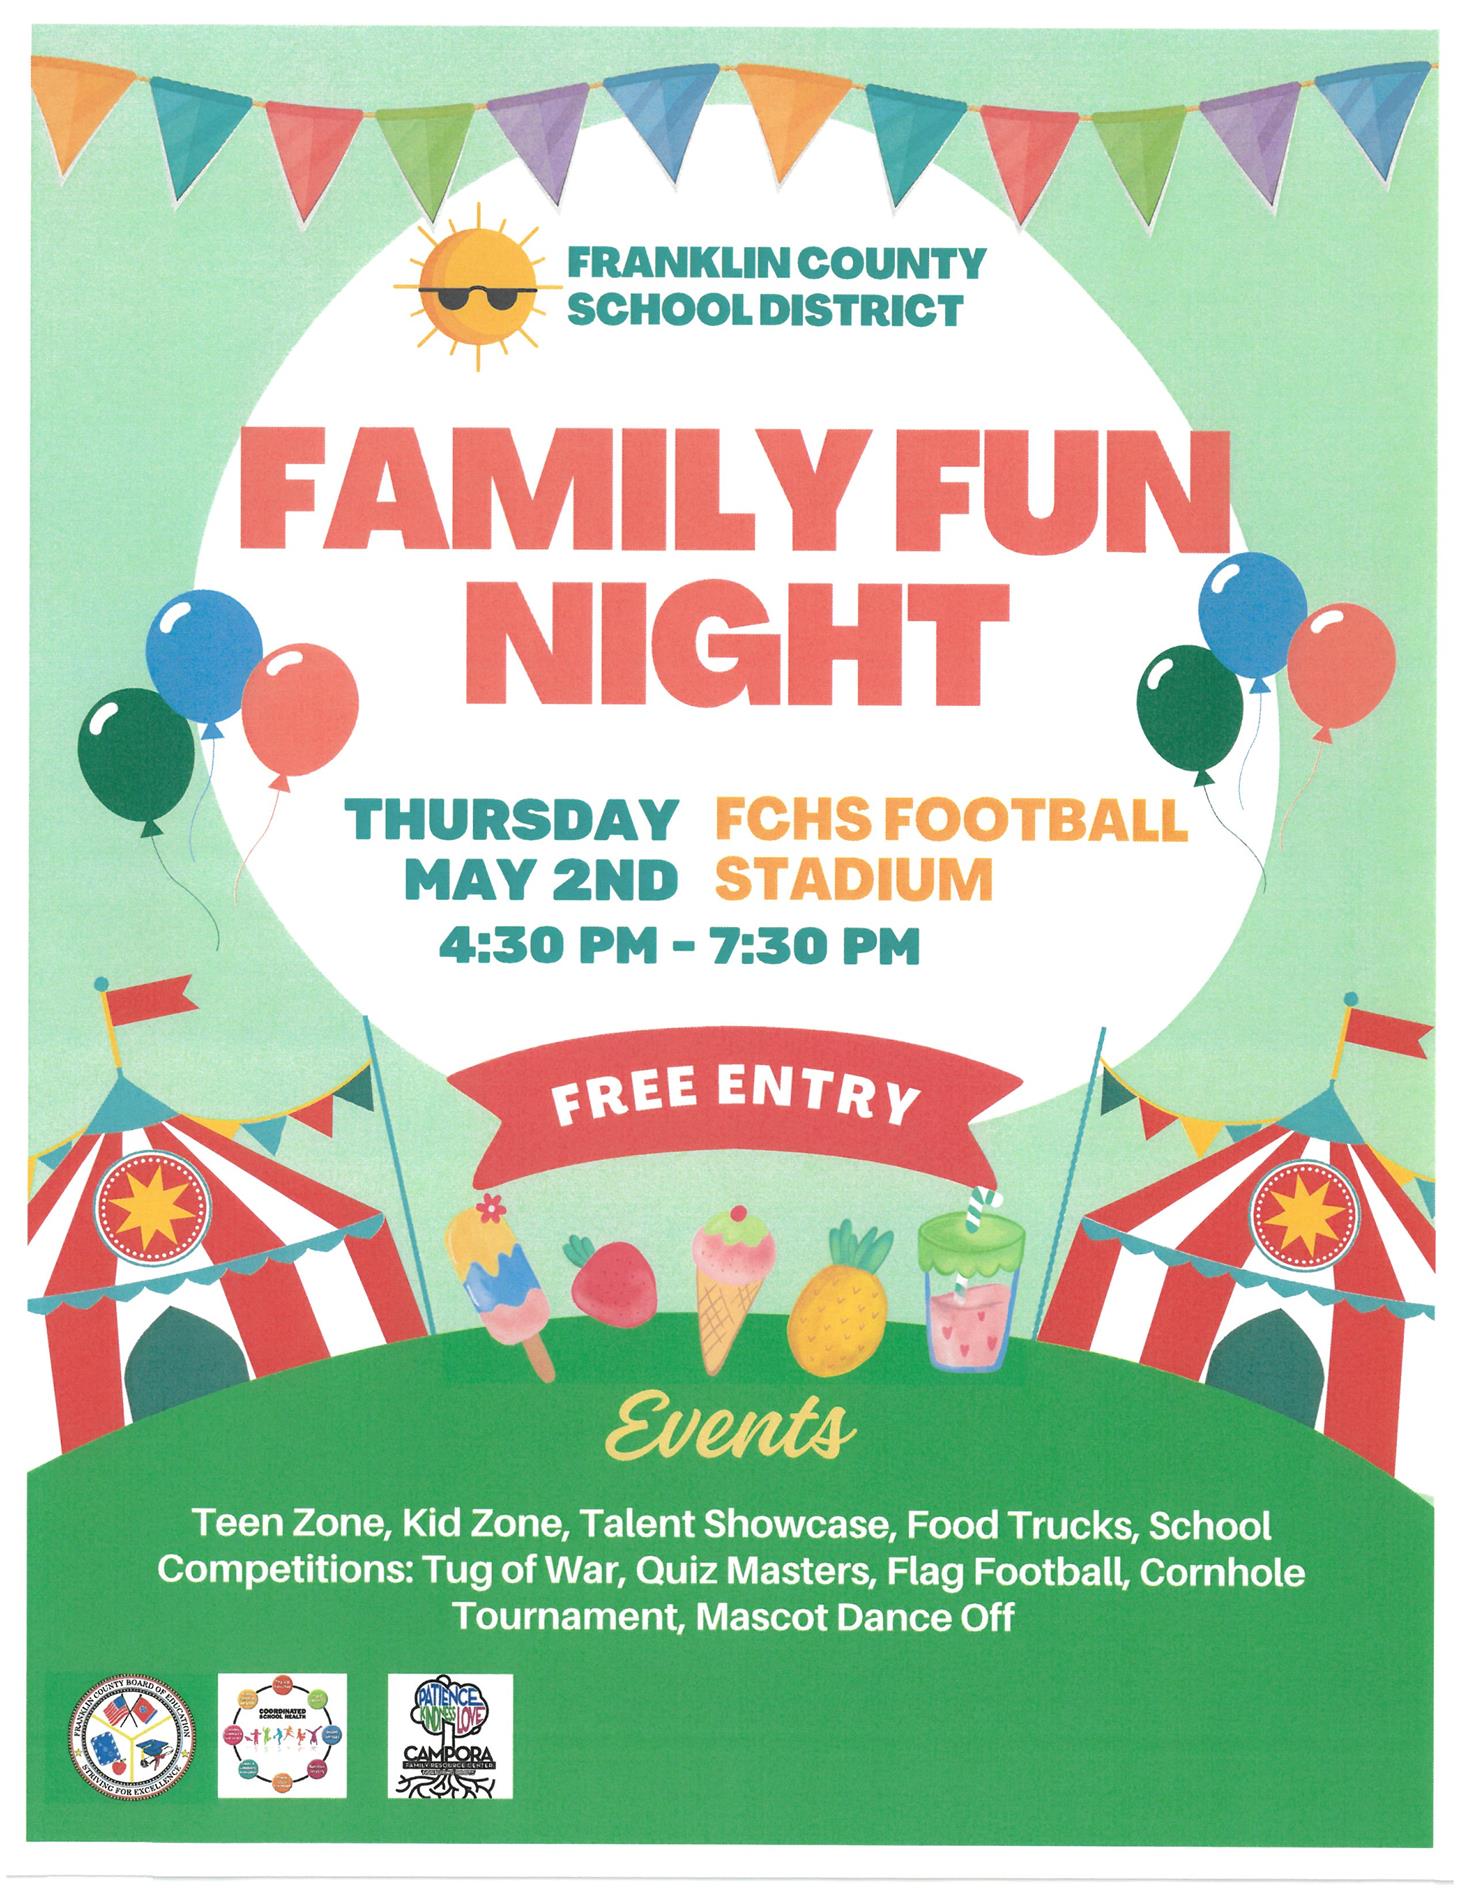 FC School district Family Fun night Thursday May 2nd at the FCHS Football stadium from 4:30 to 7:30 pm. Free entry. 